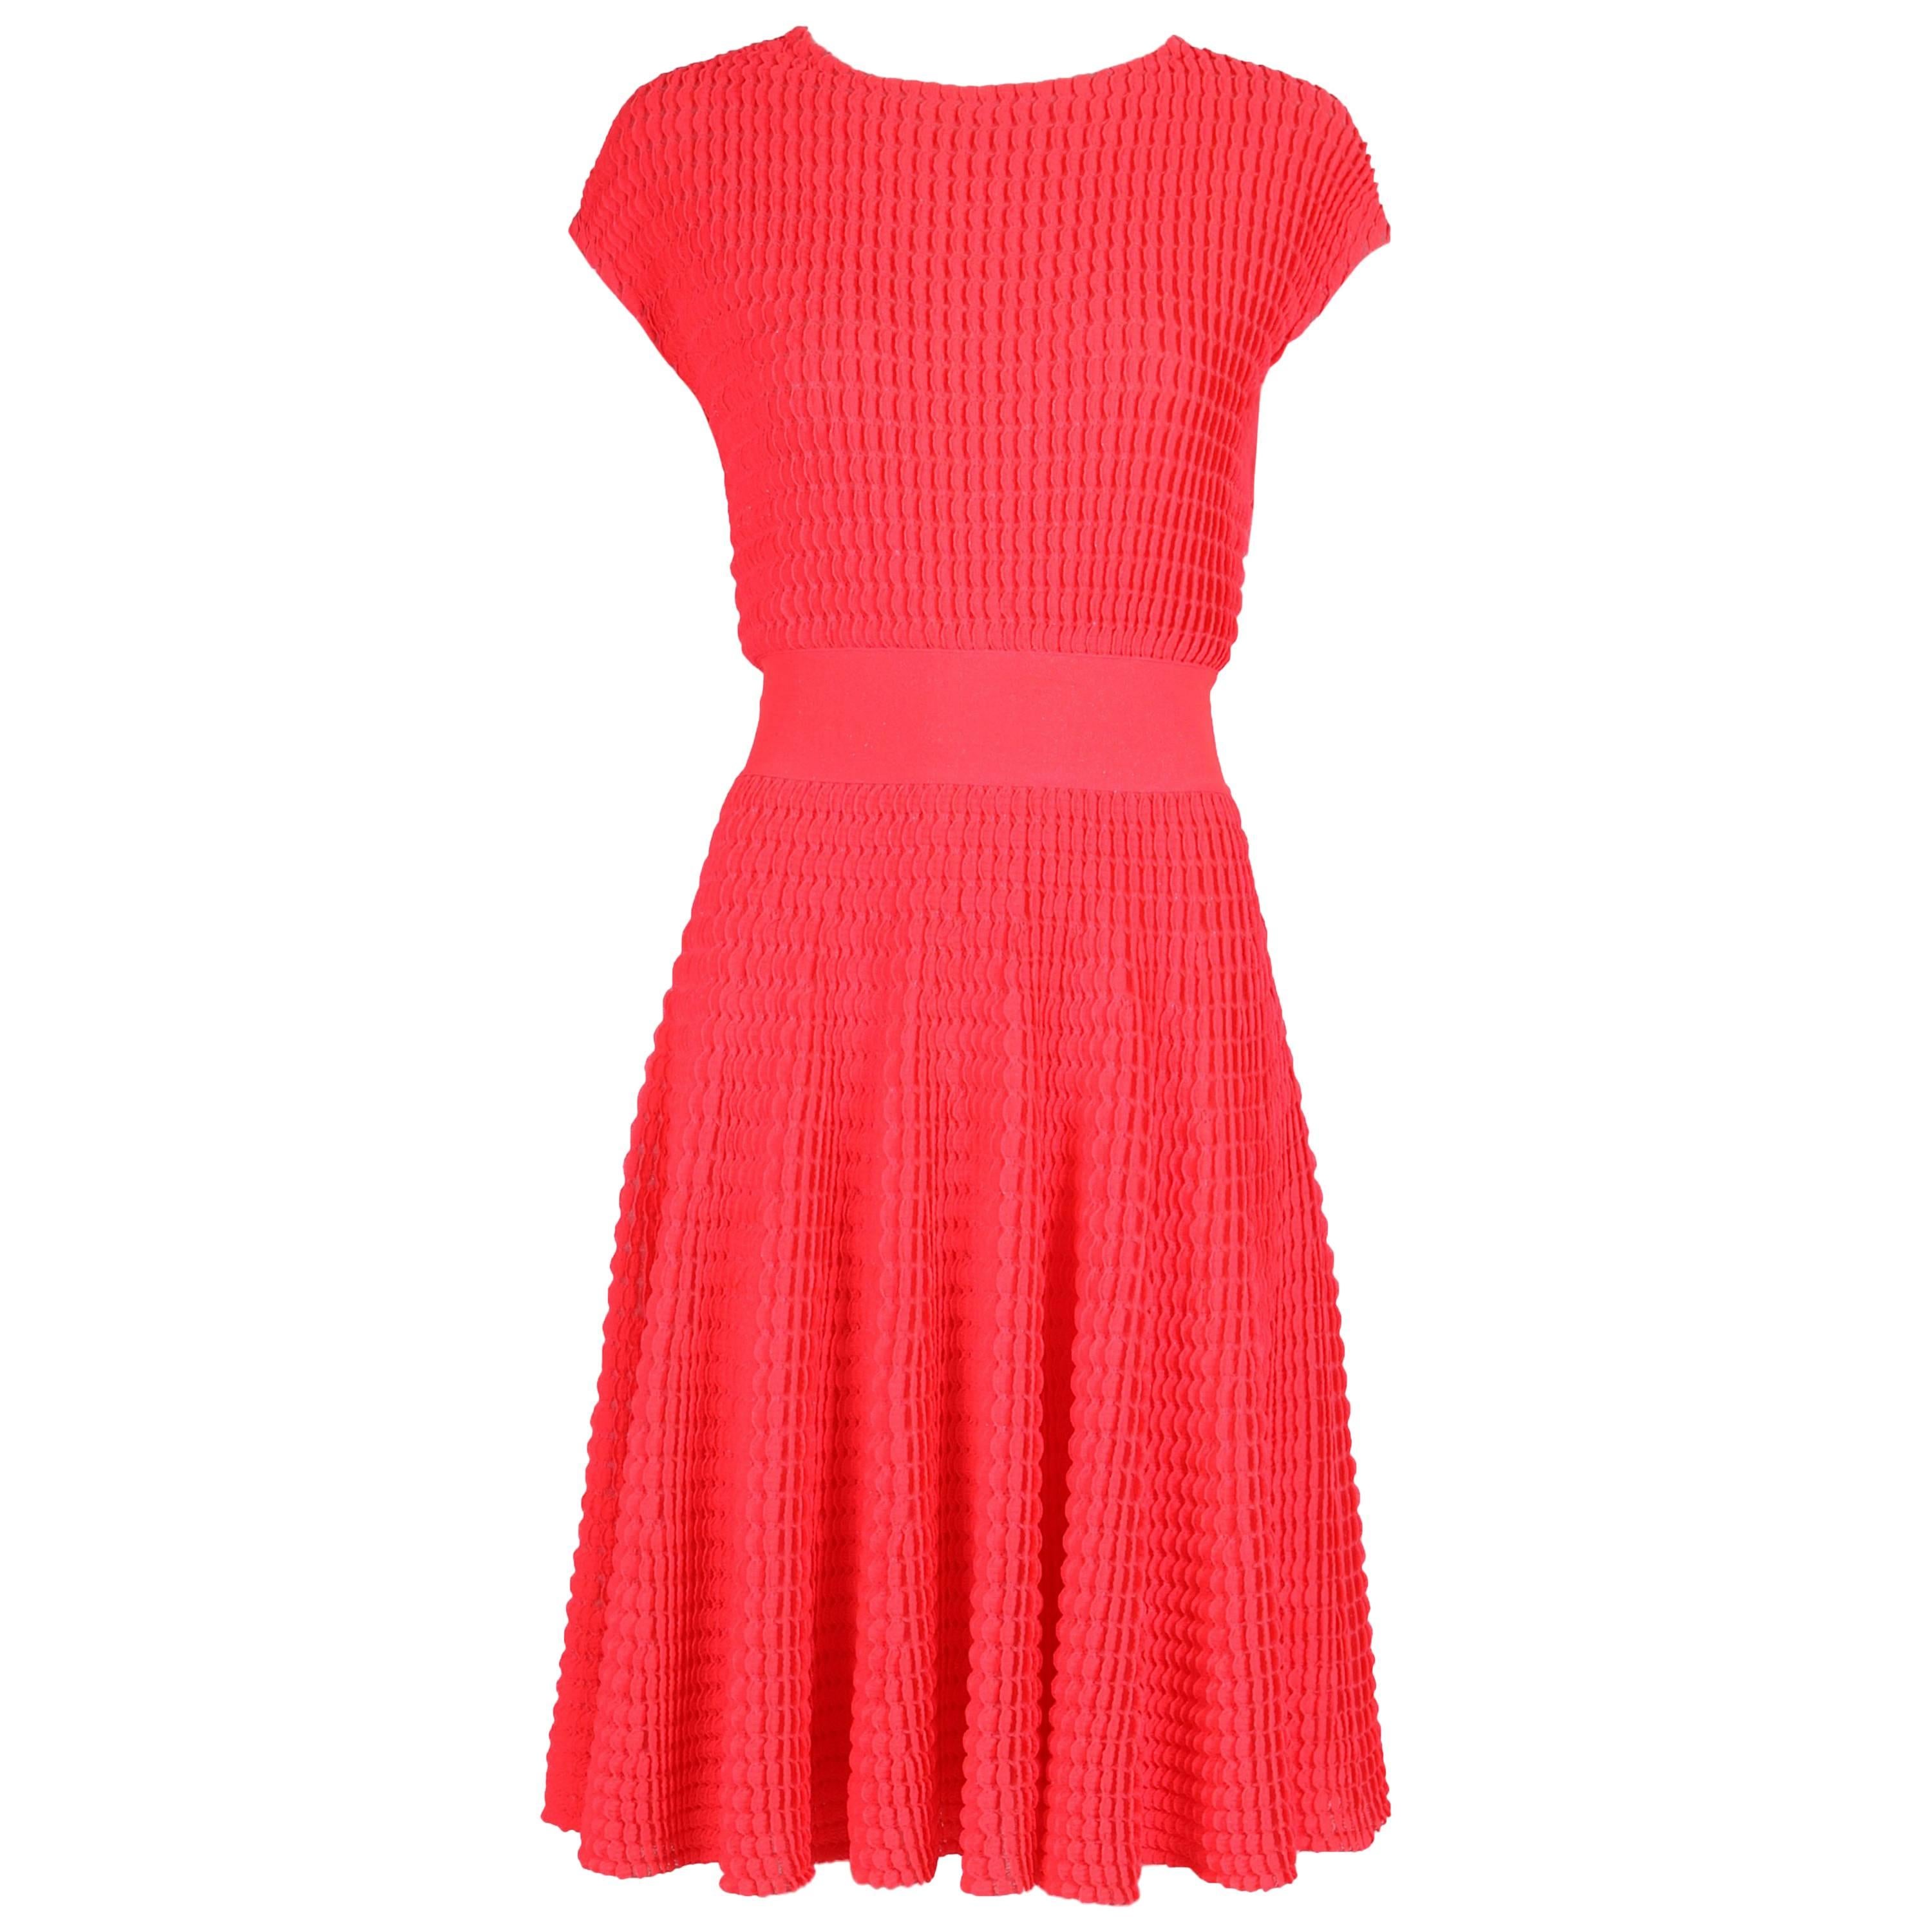 2013 Christian Dior by Raf Simons Neon Pink Textured Stretch Cocktail Day Dress